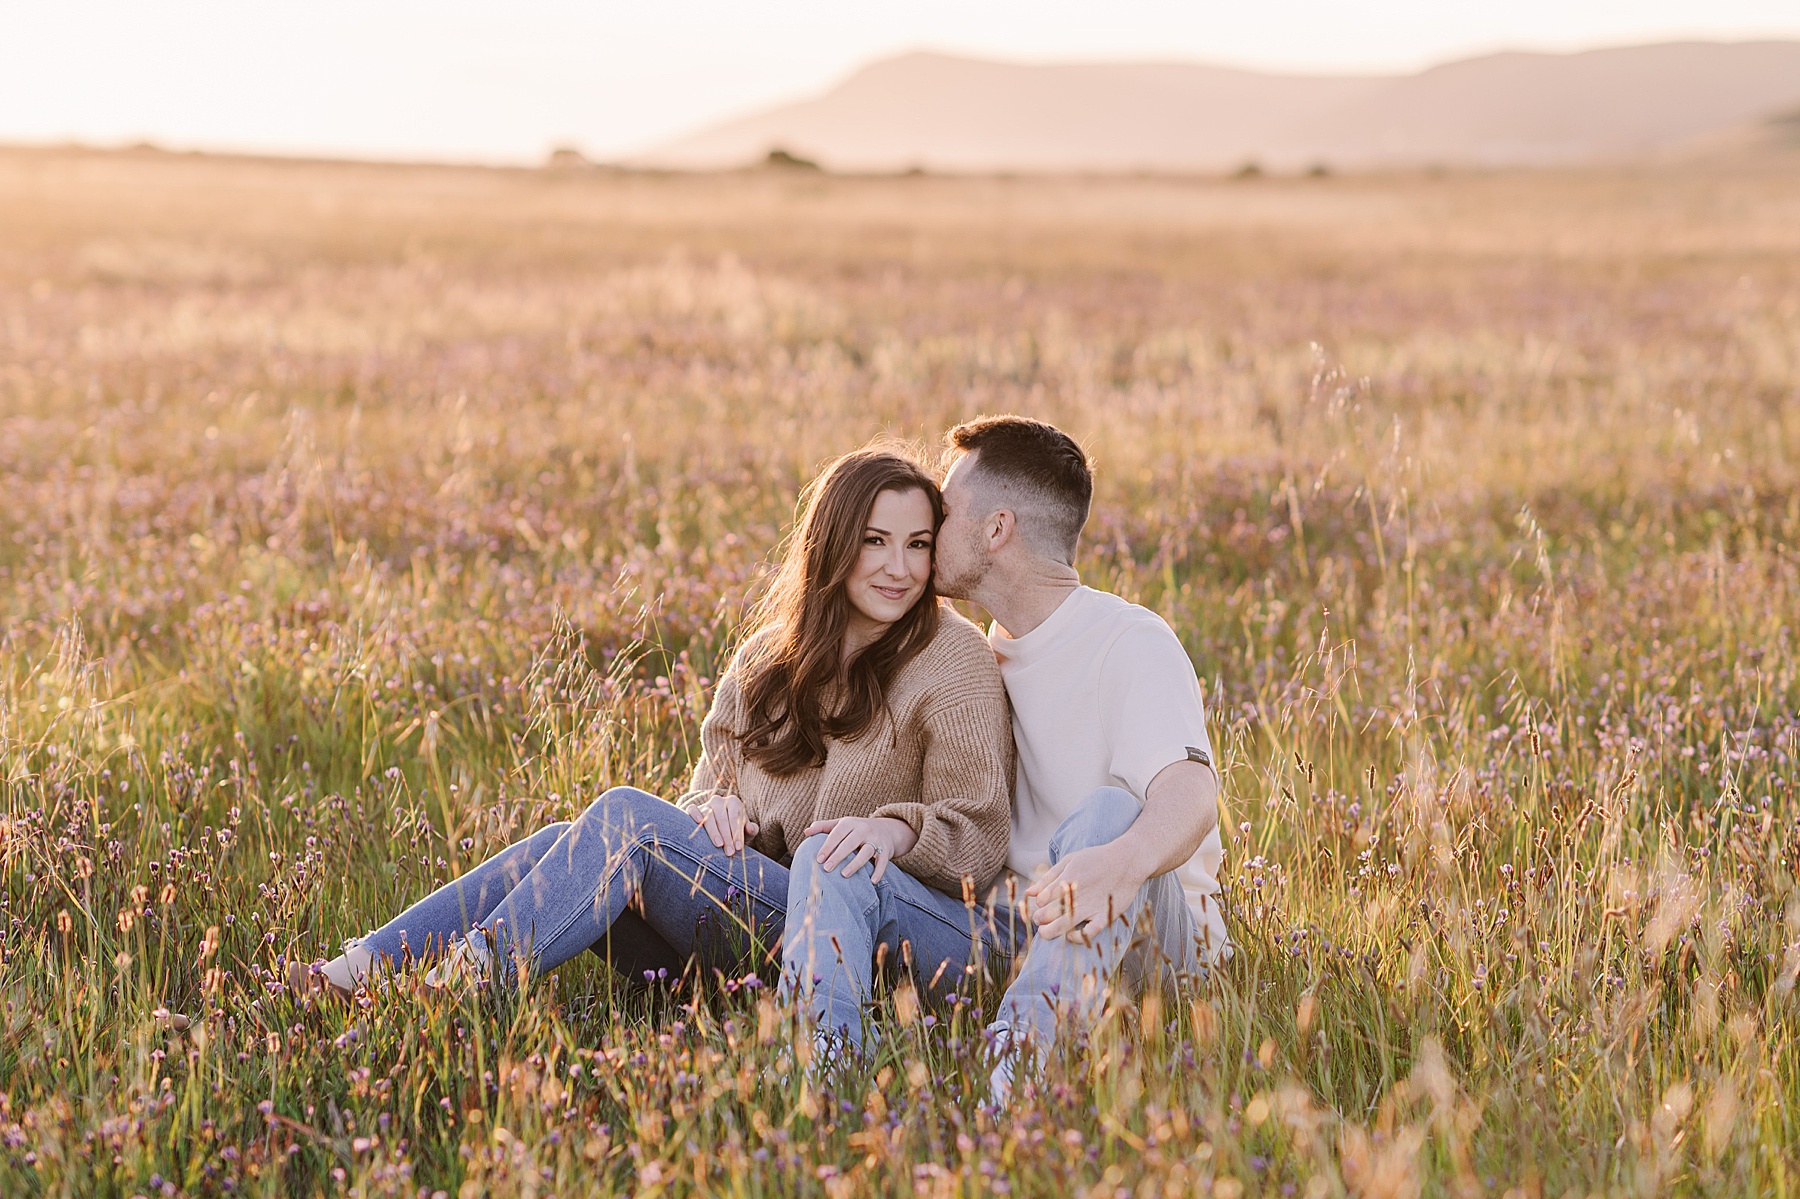 California Wildflower Superbloom | How to Enjoy it From a California Family Photographer